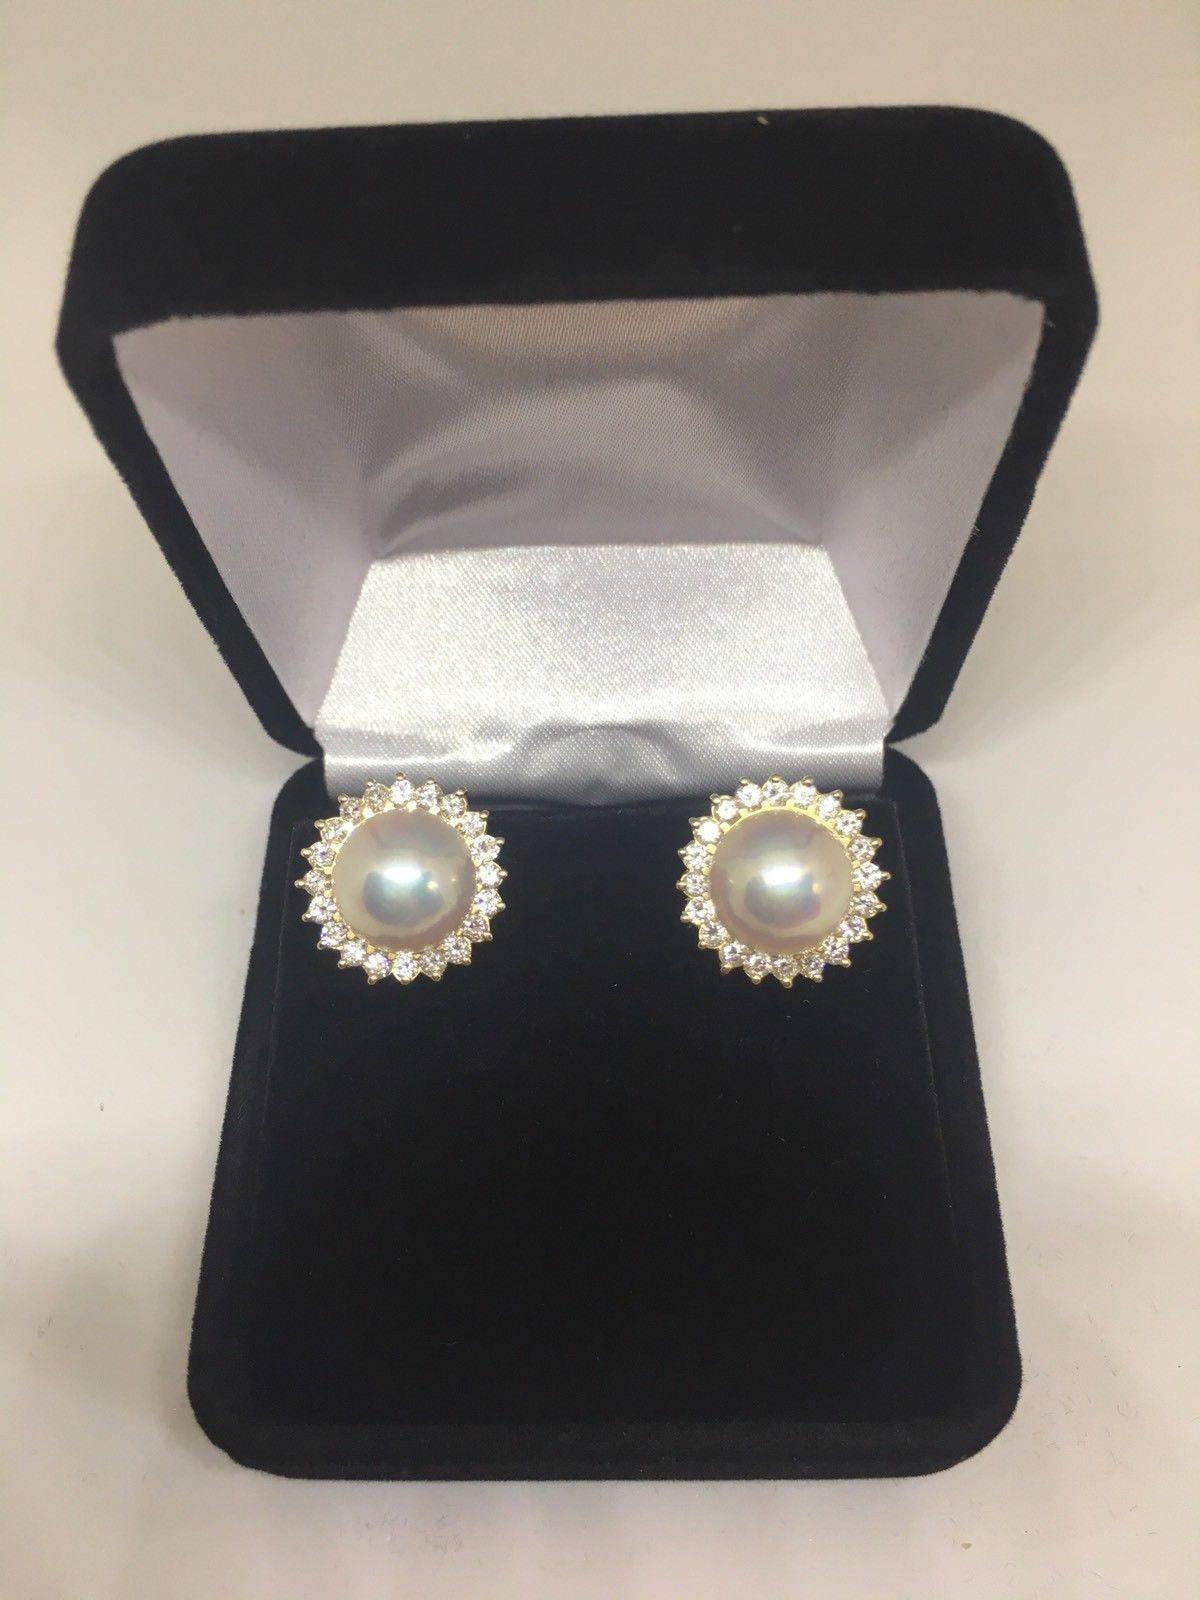  
Beautiful pair of 14k yellow gold mabe pearl and brilliant cut diamond halo earrings.  The earrings feature a halo of G/H VS quality diamonds centering a 20 mm mabe pearl.  The pierced earrings measure 3/4 " x 3/4 " and are fitted with